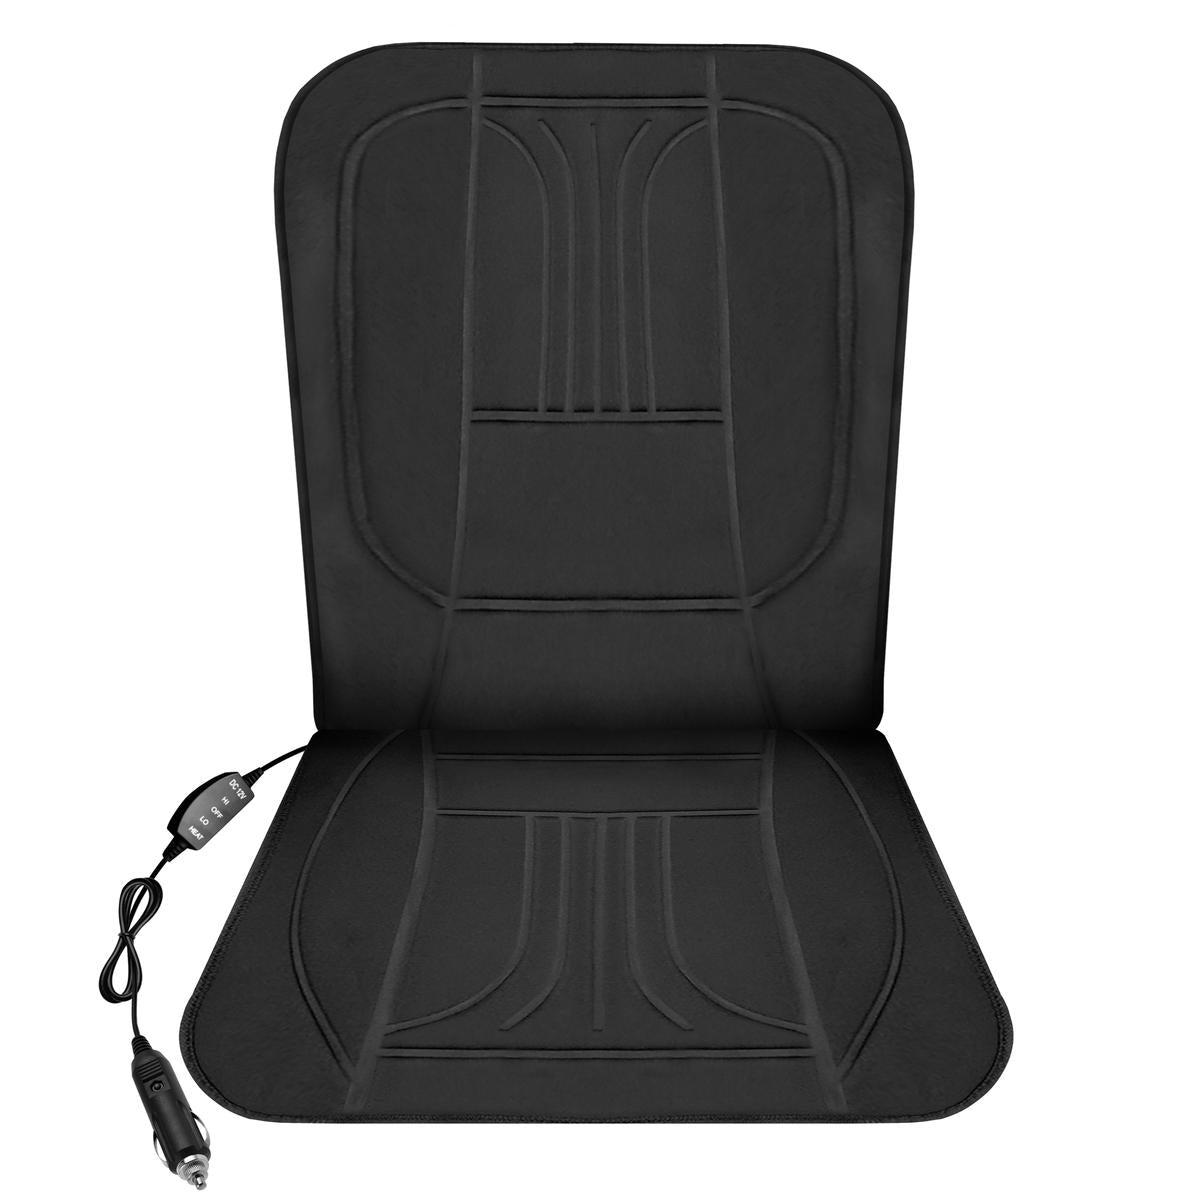 12V Heated Car Seat Cushion,Seat Warmer with Hi/Med/Low Temp Switch,45 Mins  Auto Off Timer(Grey)